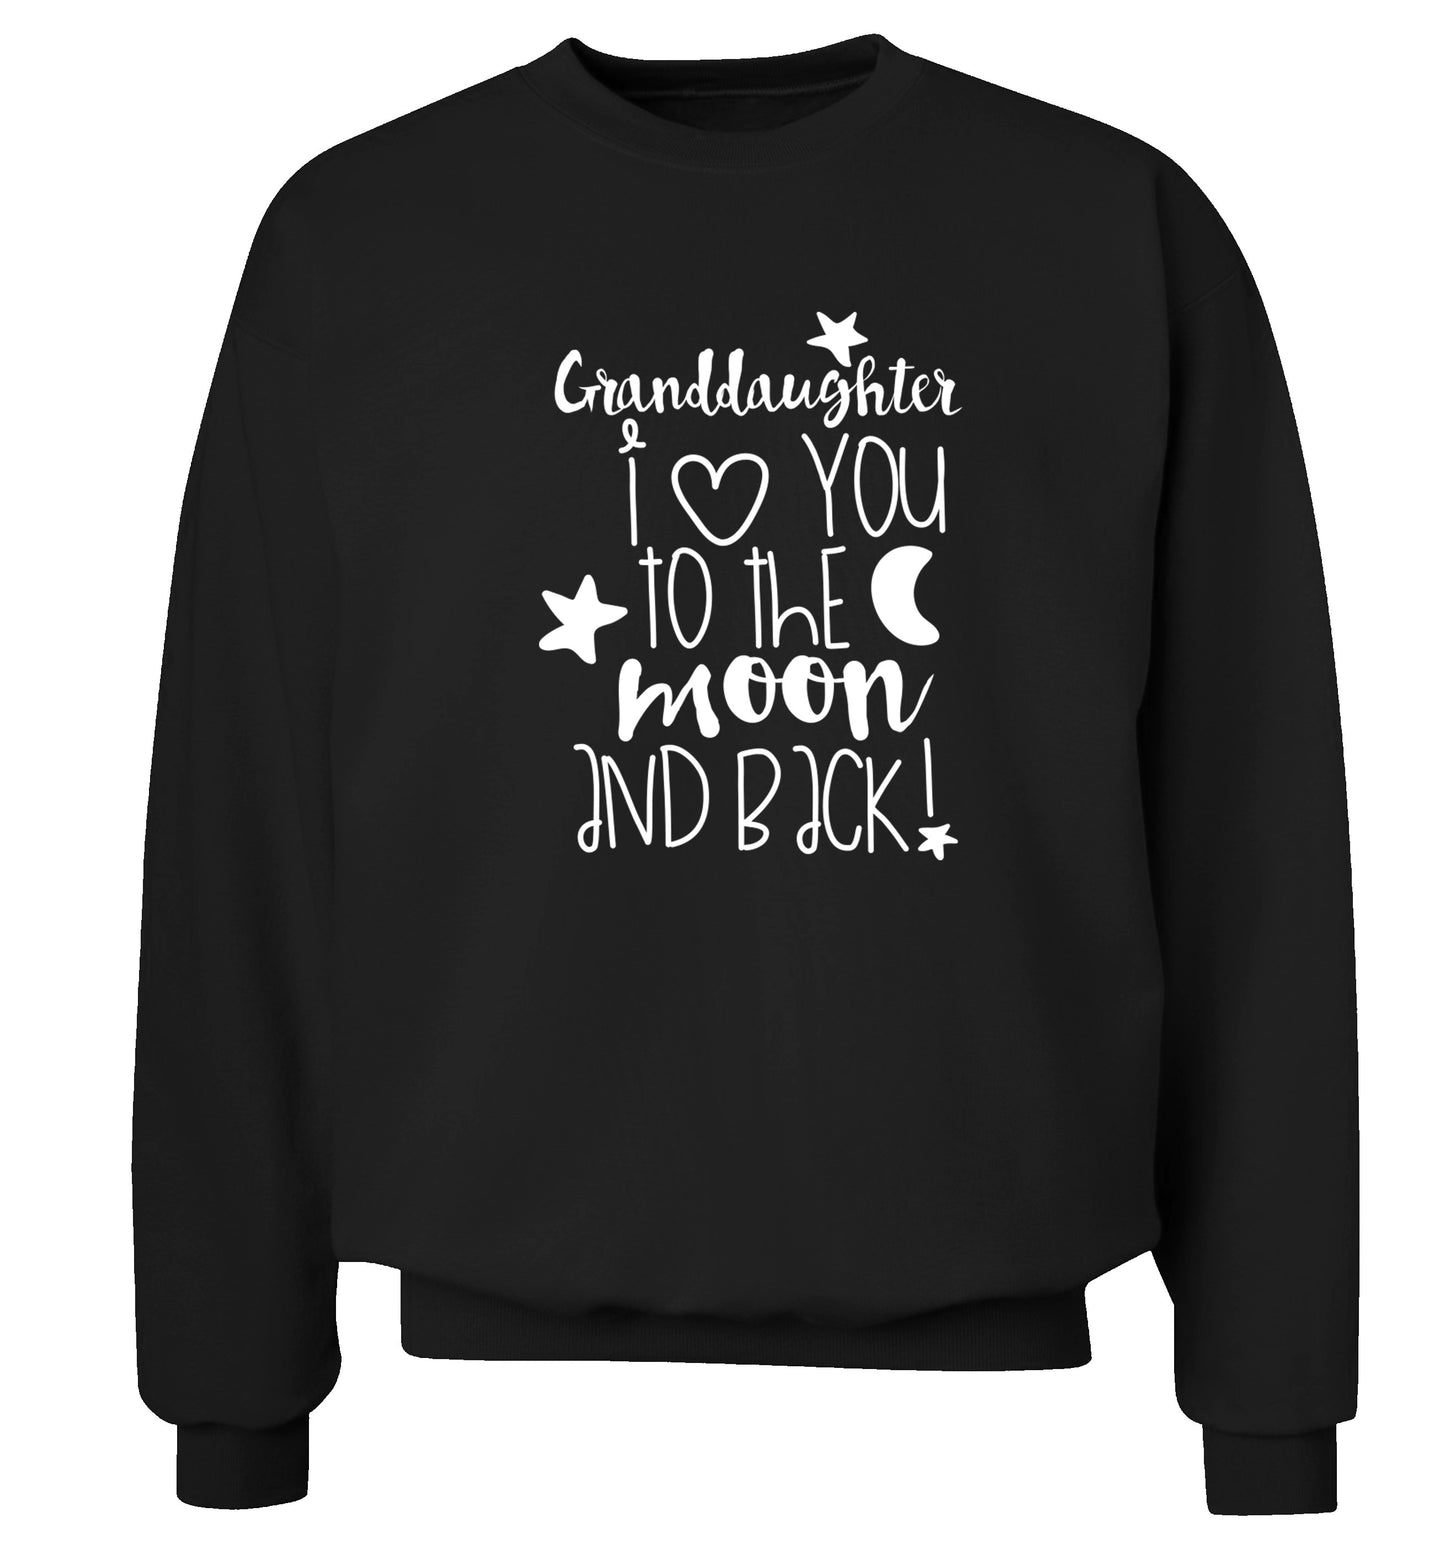 Granddaughter I love you to the moon and back Adult's unisex black  sweater 2XL